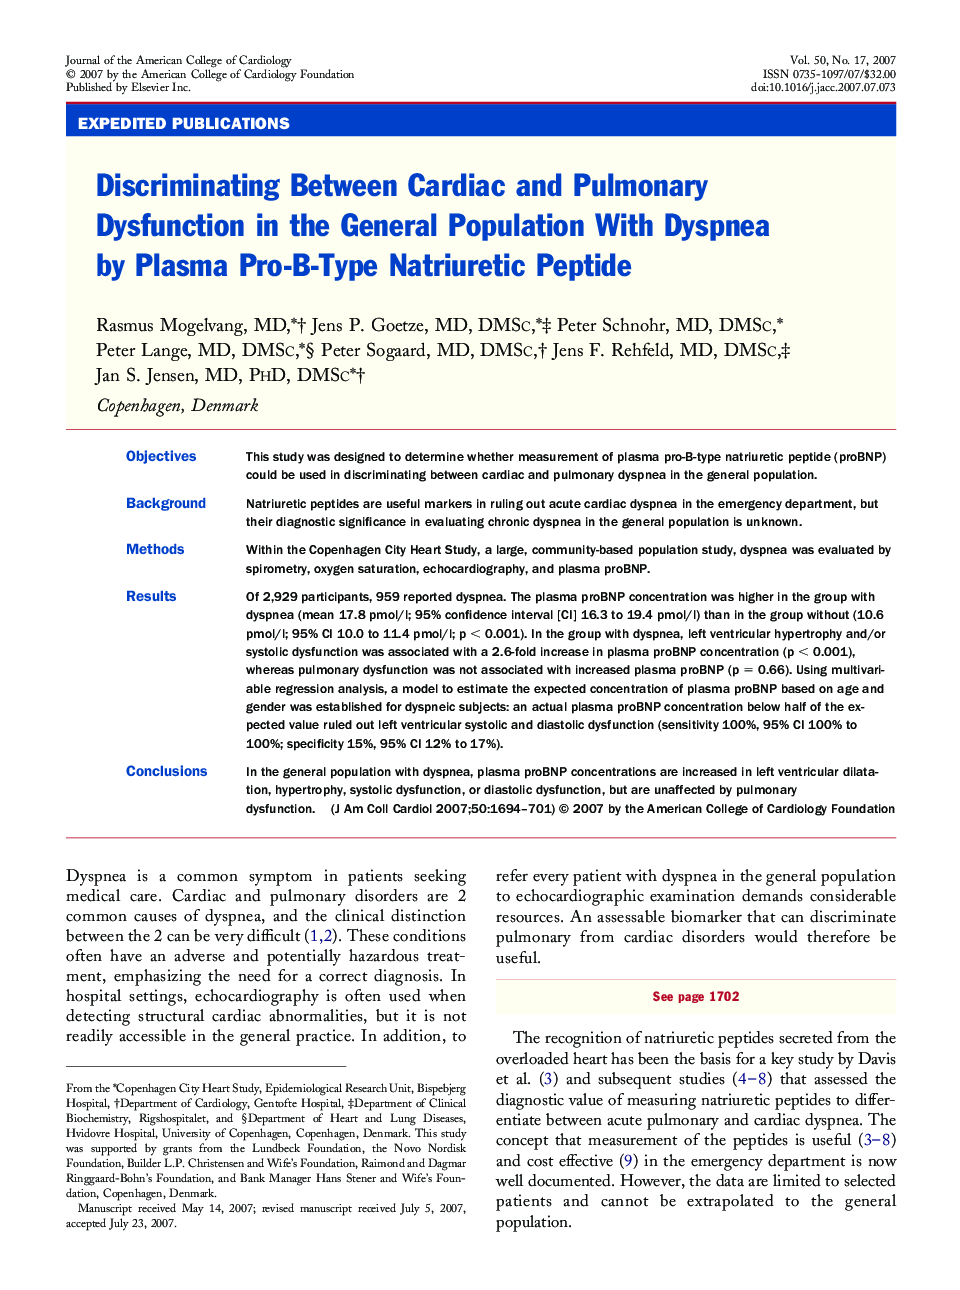 Discriminating Between Cardiac and Pulmonary Dysfunction in the General Population With Dyspnea by Plasma Pro-B-Type Natriuretic Peptide